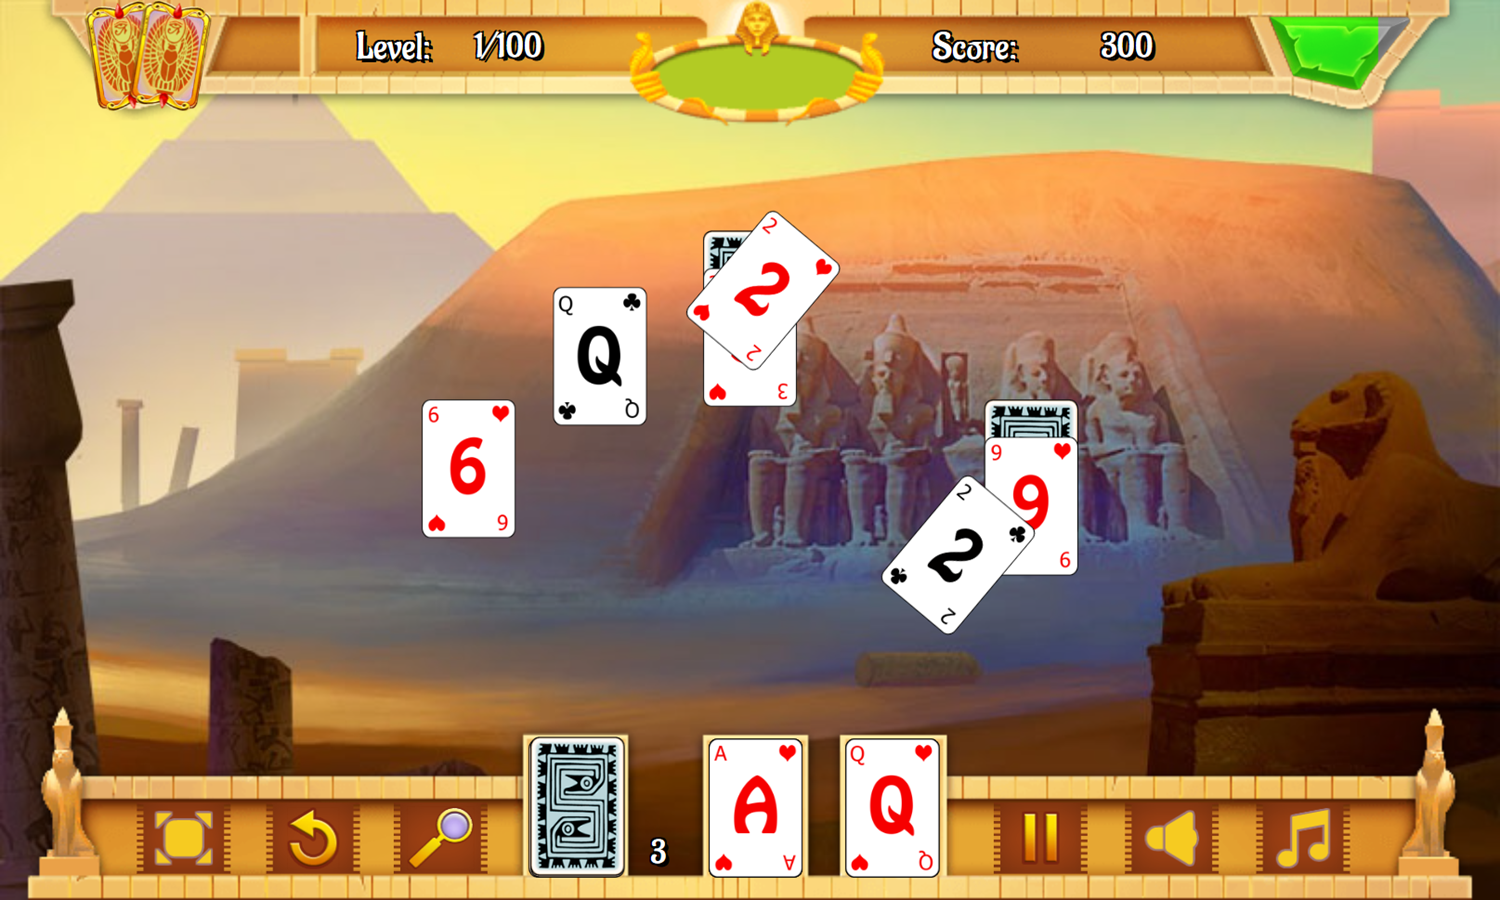 Egypt Solitaire Game Level Play Screenshot.